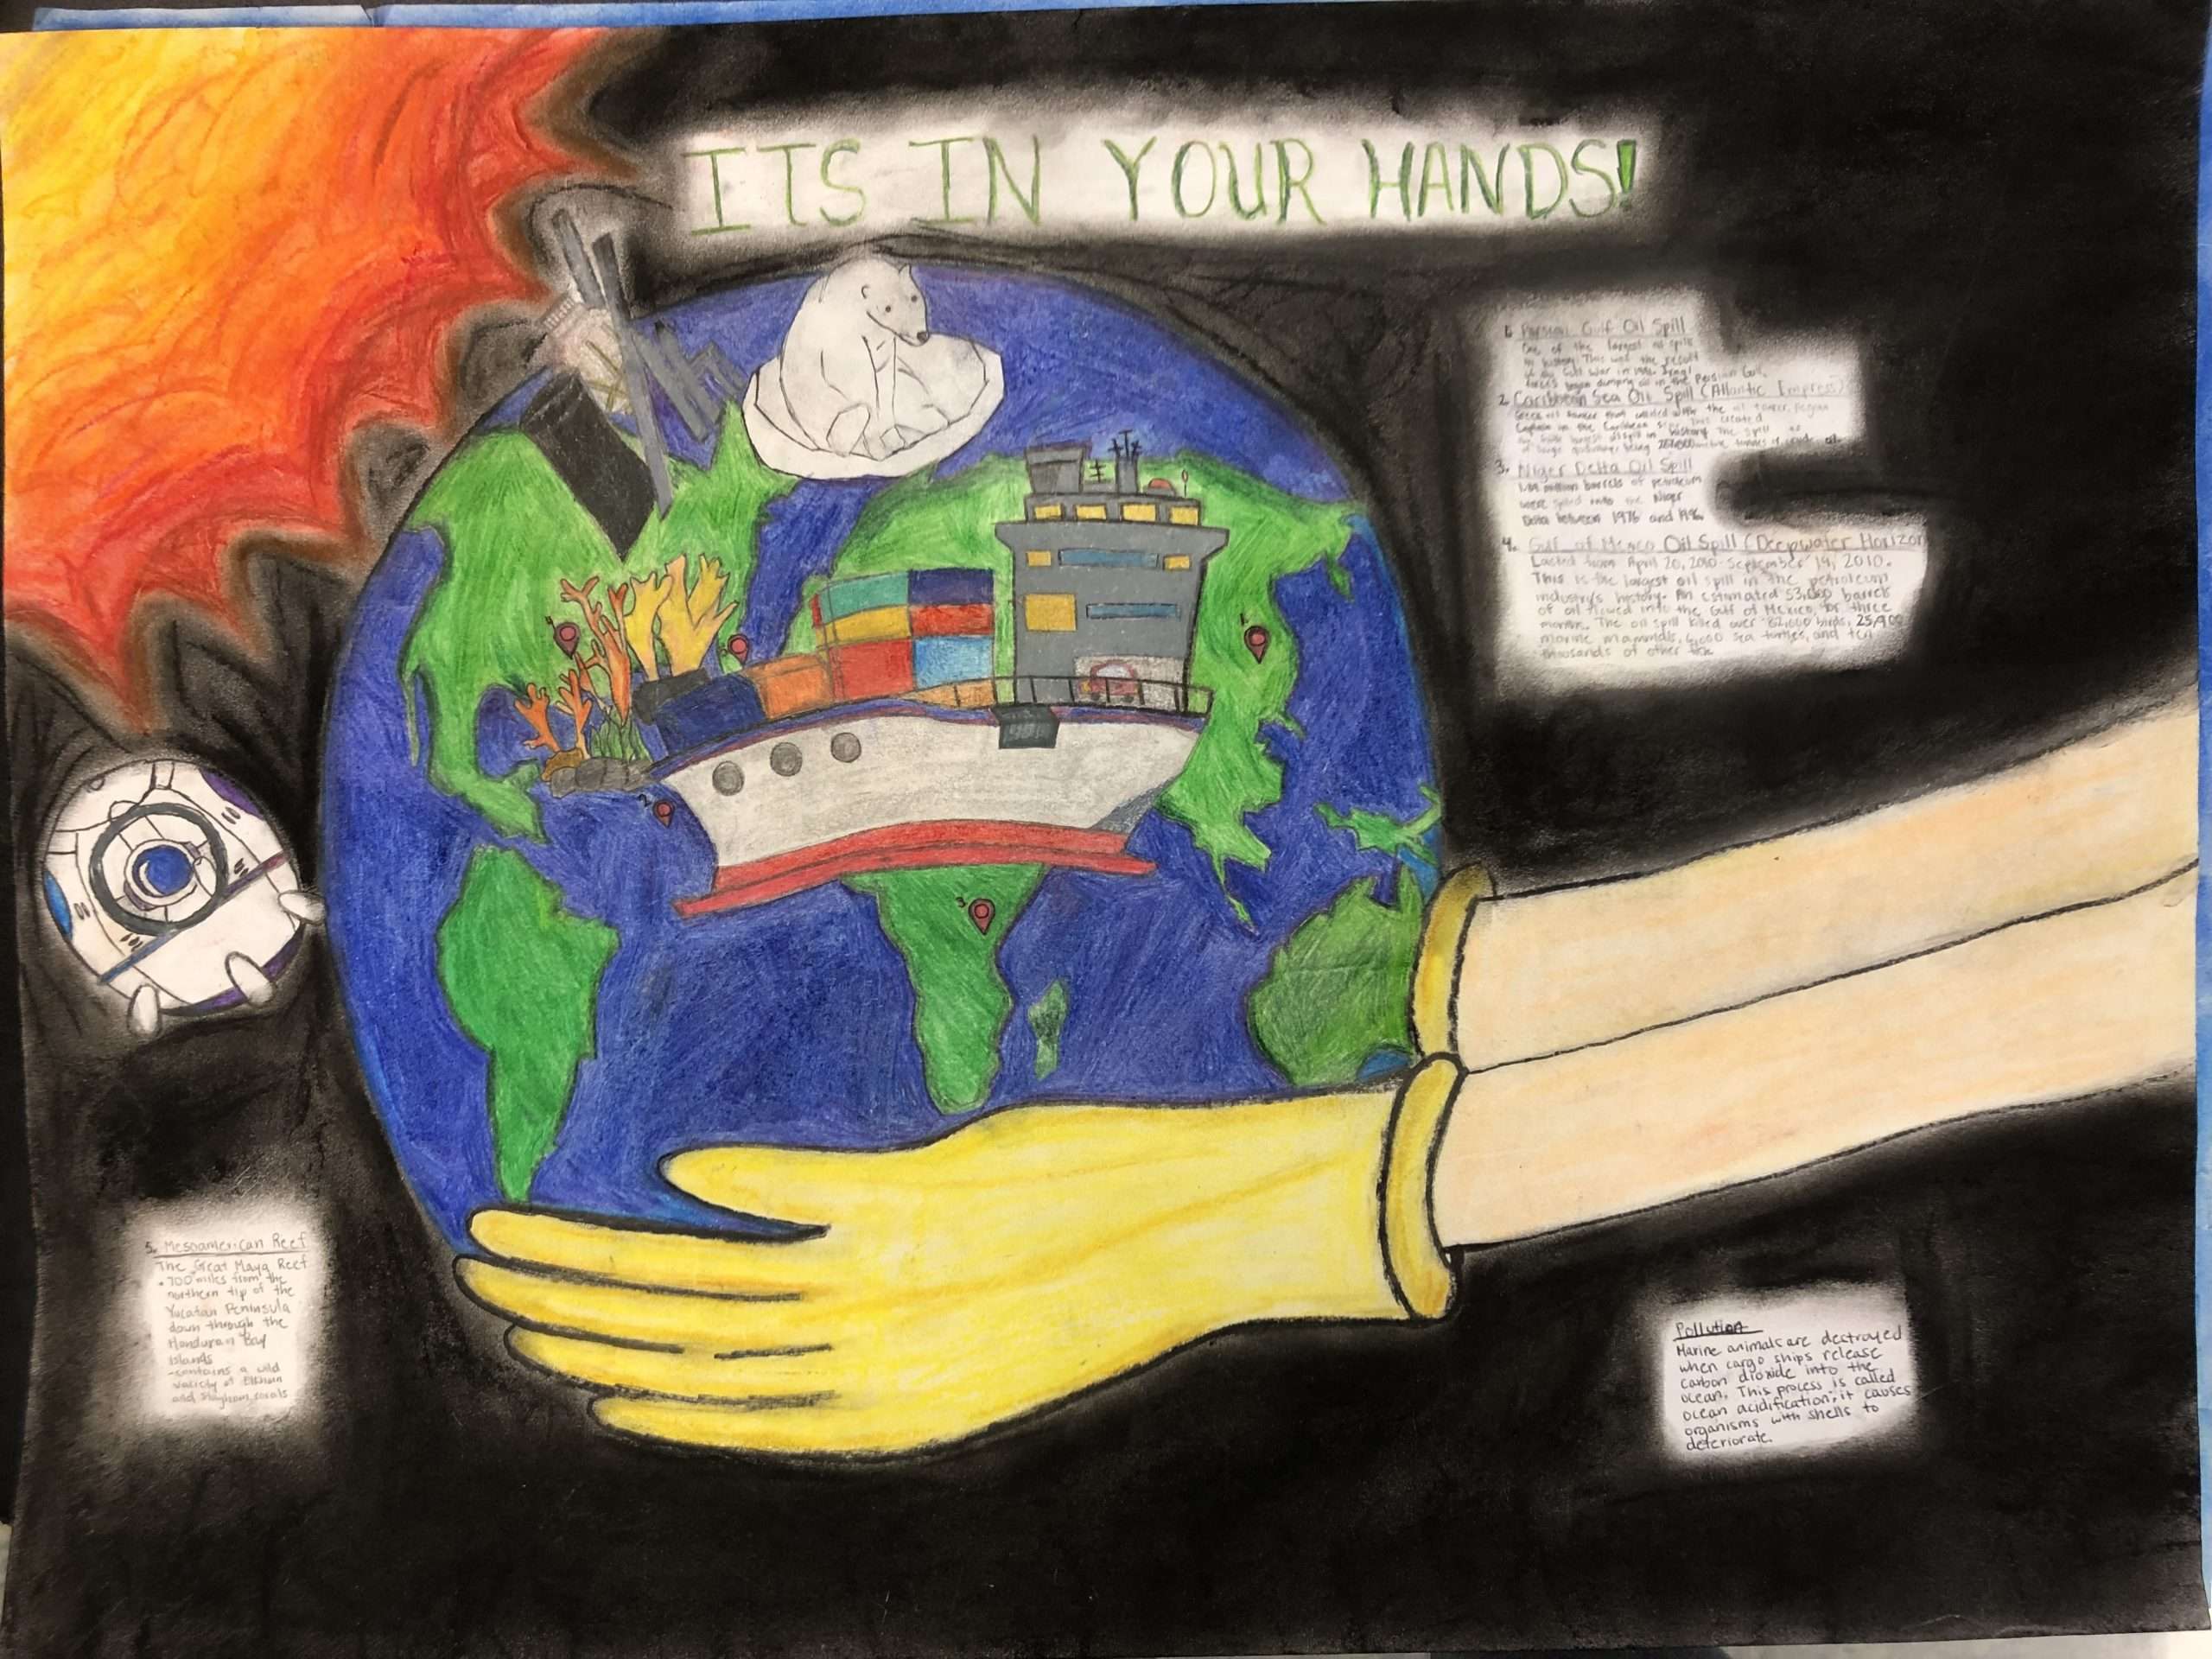 Drawing of the earth in outer space with a black background and half the sun in the top left corner. There is a satellite below the sun and to the left of the earth. Two hands with gloves are extending from the right side of the drawing cupping the earth. On the earth is a ship and a polar bear. There is text on the top that reads "It's in your hands!"